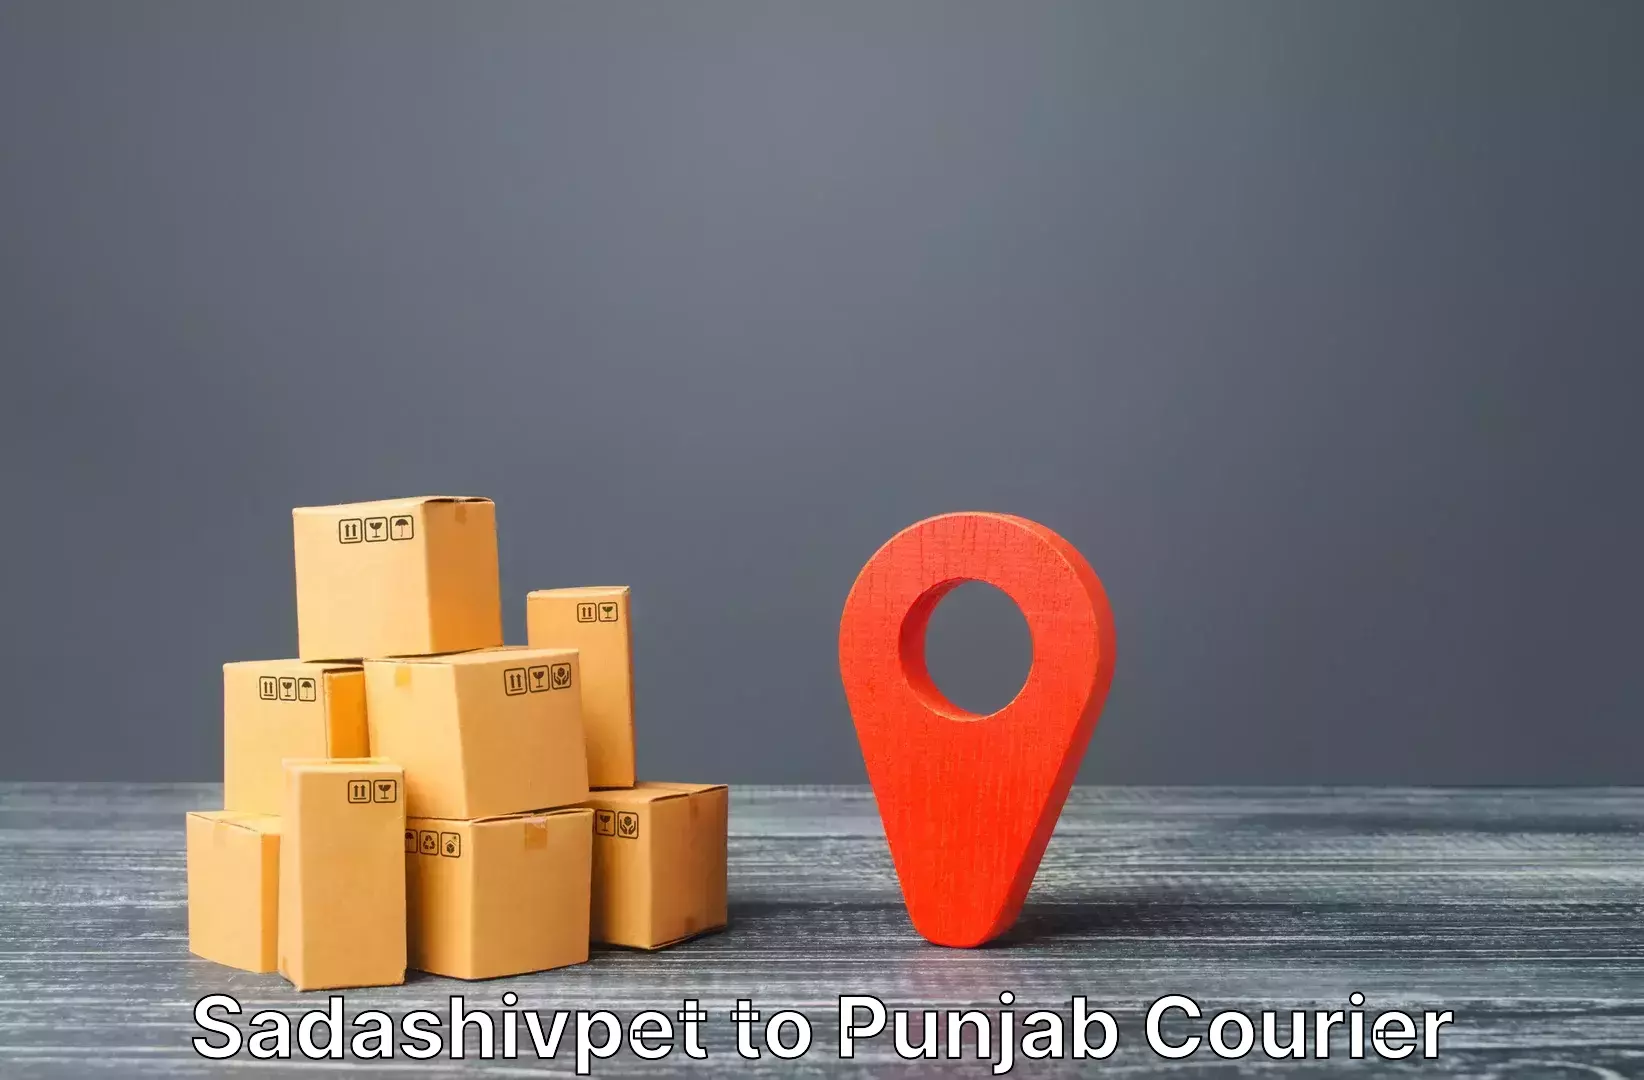 Personal effects shipping in Sadashivpet to Amritsar